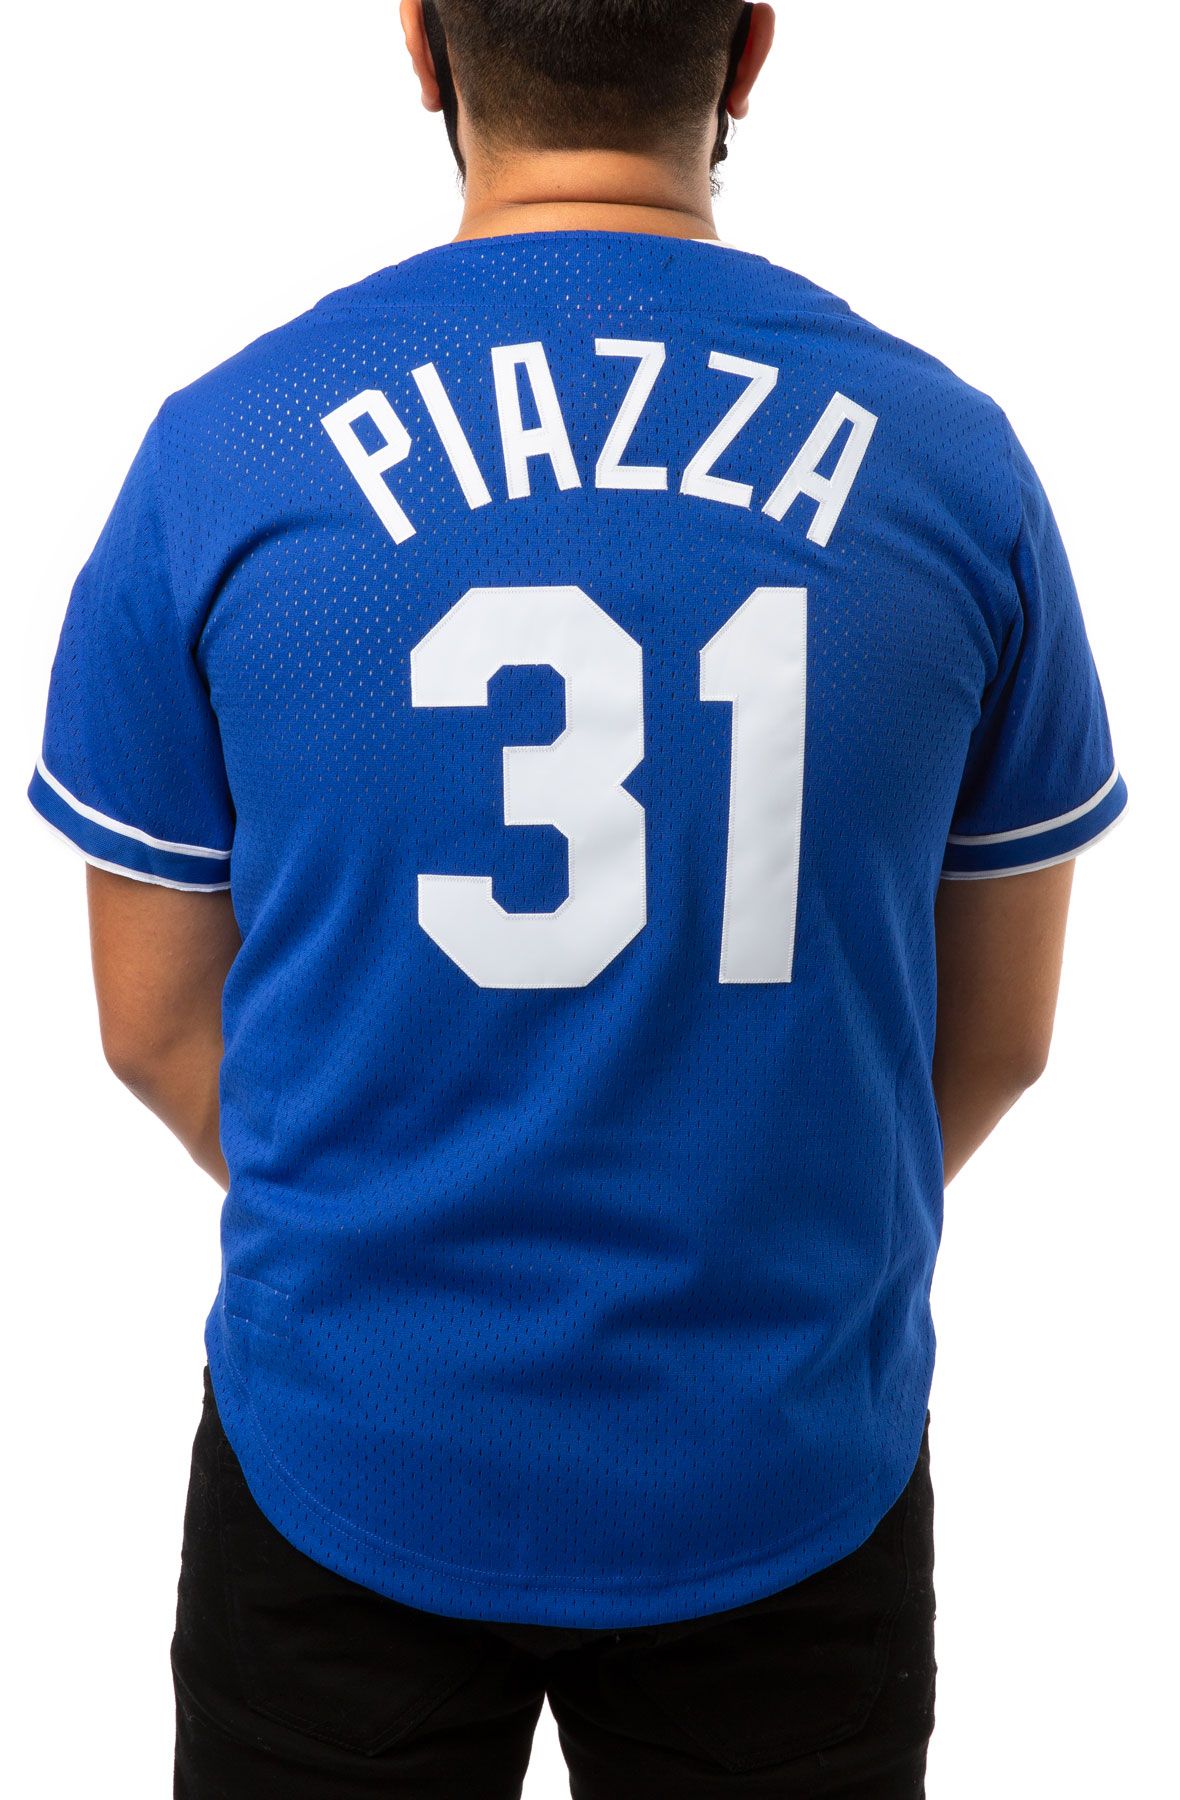 Mesh BP Jersey Los Angeles Dodgers 1997 Mike Piazza - Shop Mitchell & Ness  Shirts and Apparel Mitchell & Ness Nostalgia Co.